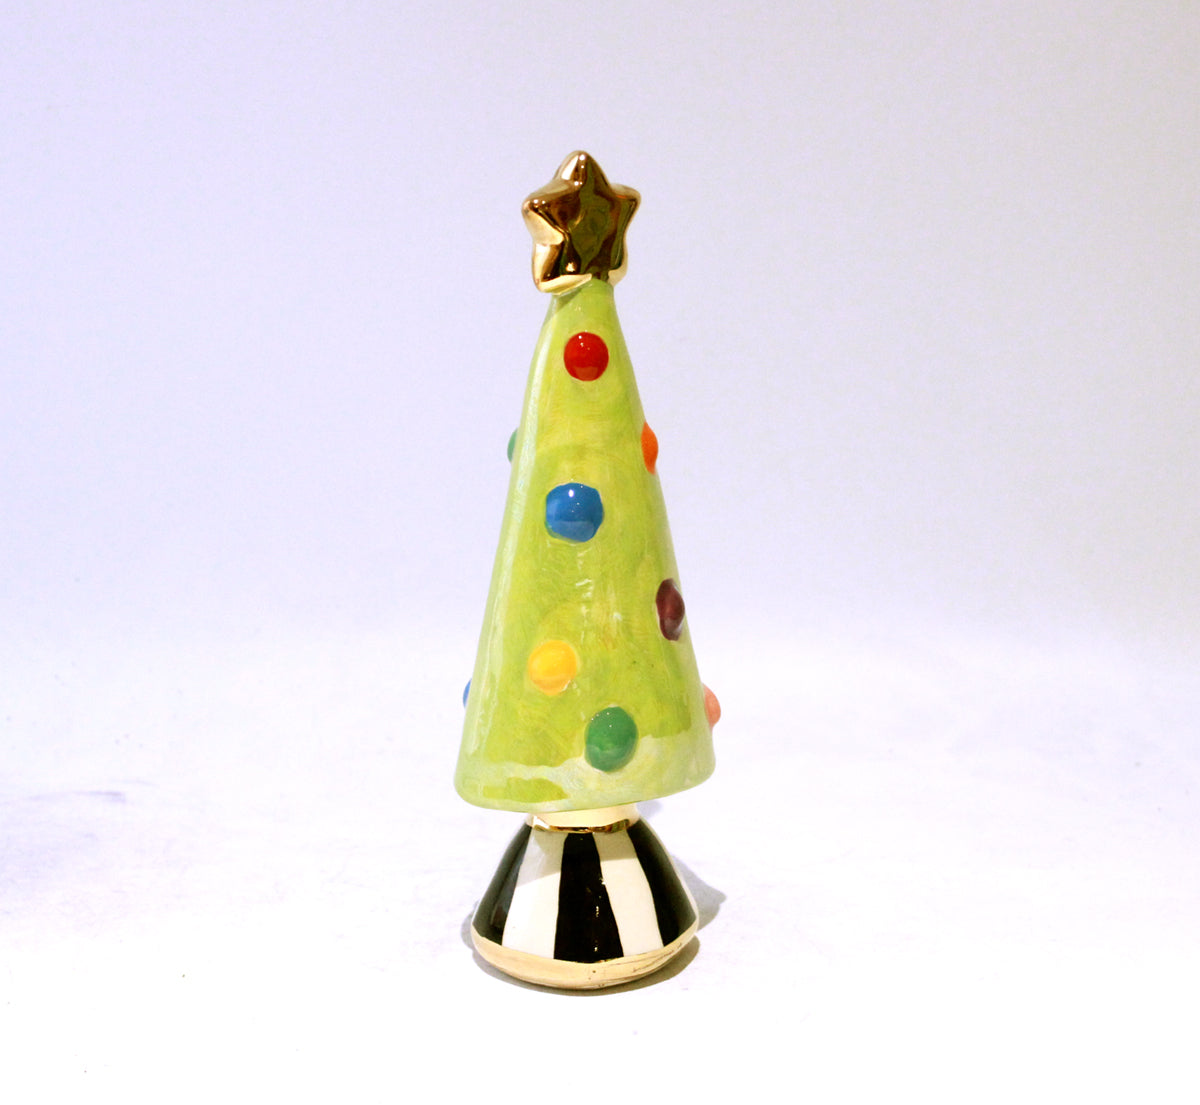 Small Christmas Tree in Green with Black and White Striped Base